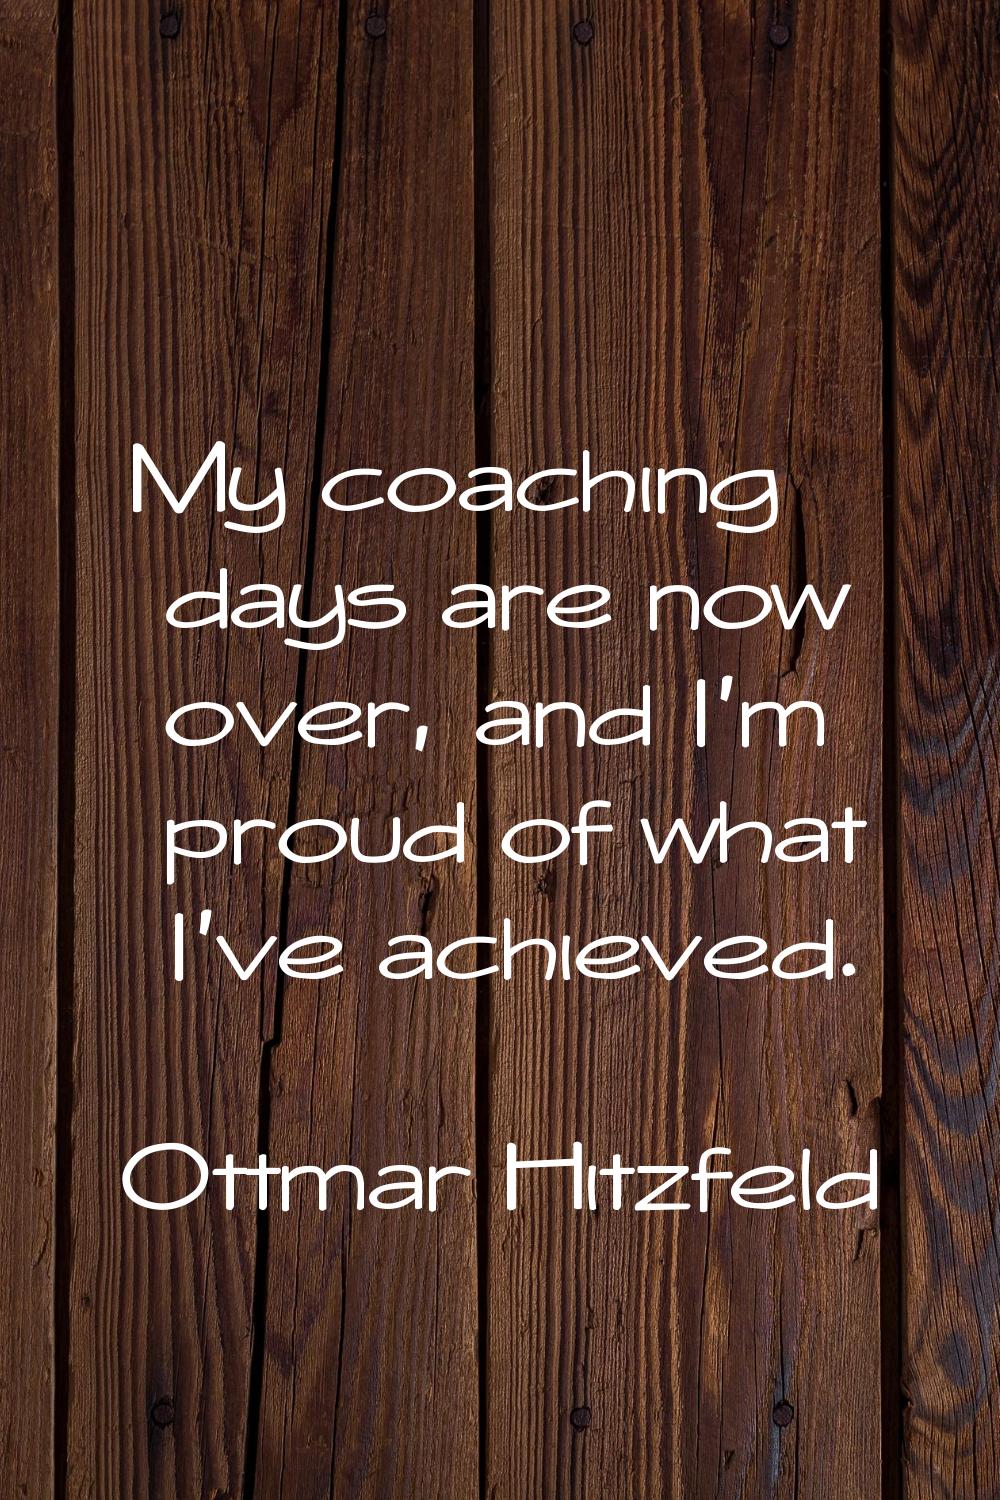 My coaching days are now over, and I'm proud of what I've achieved.